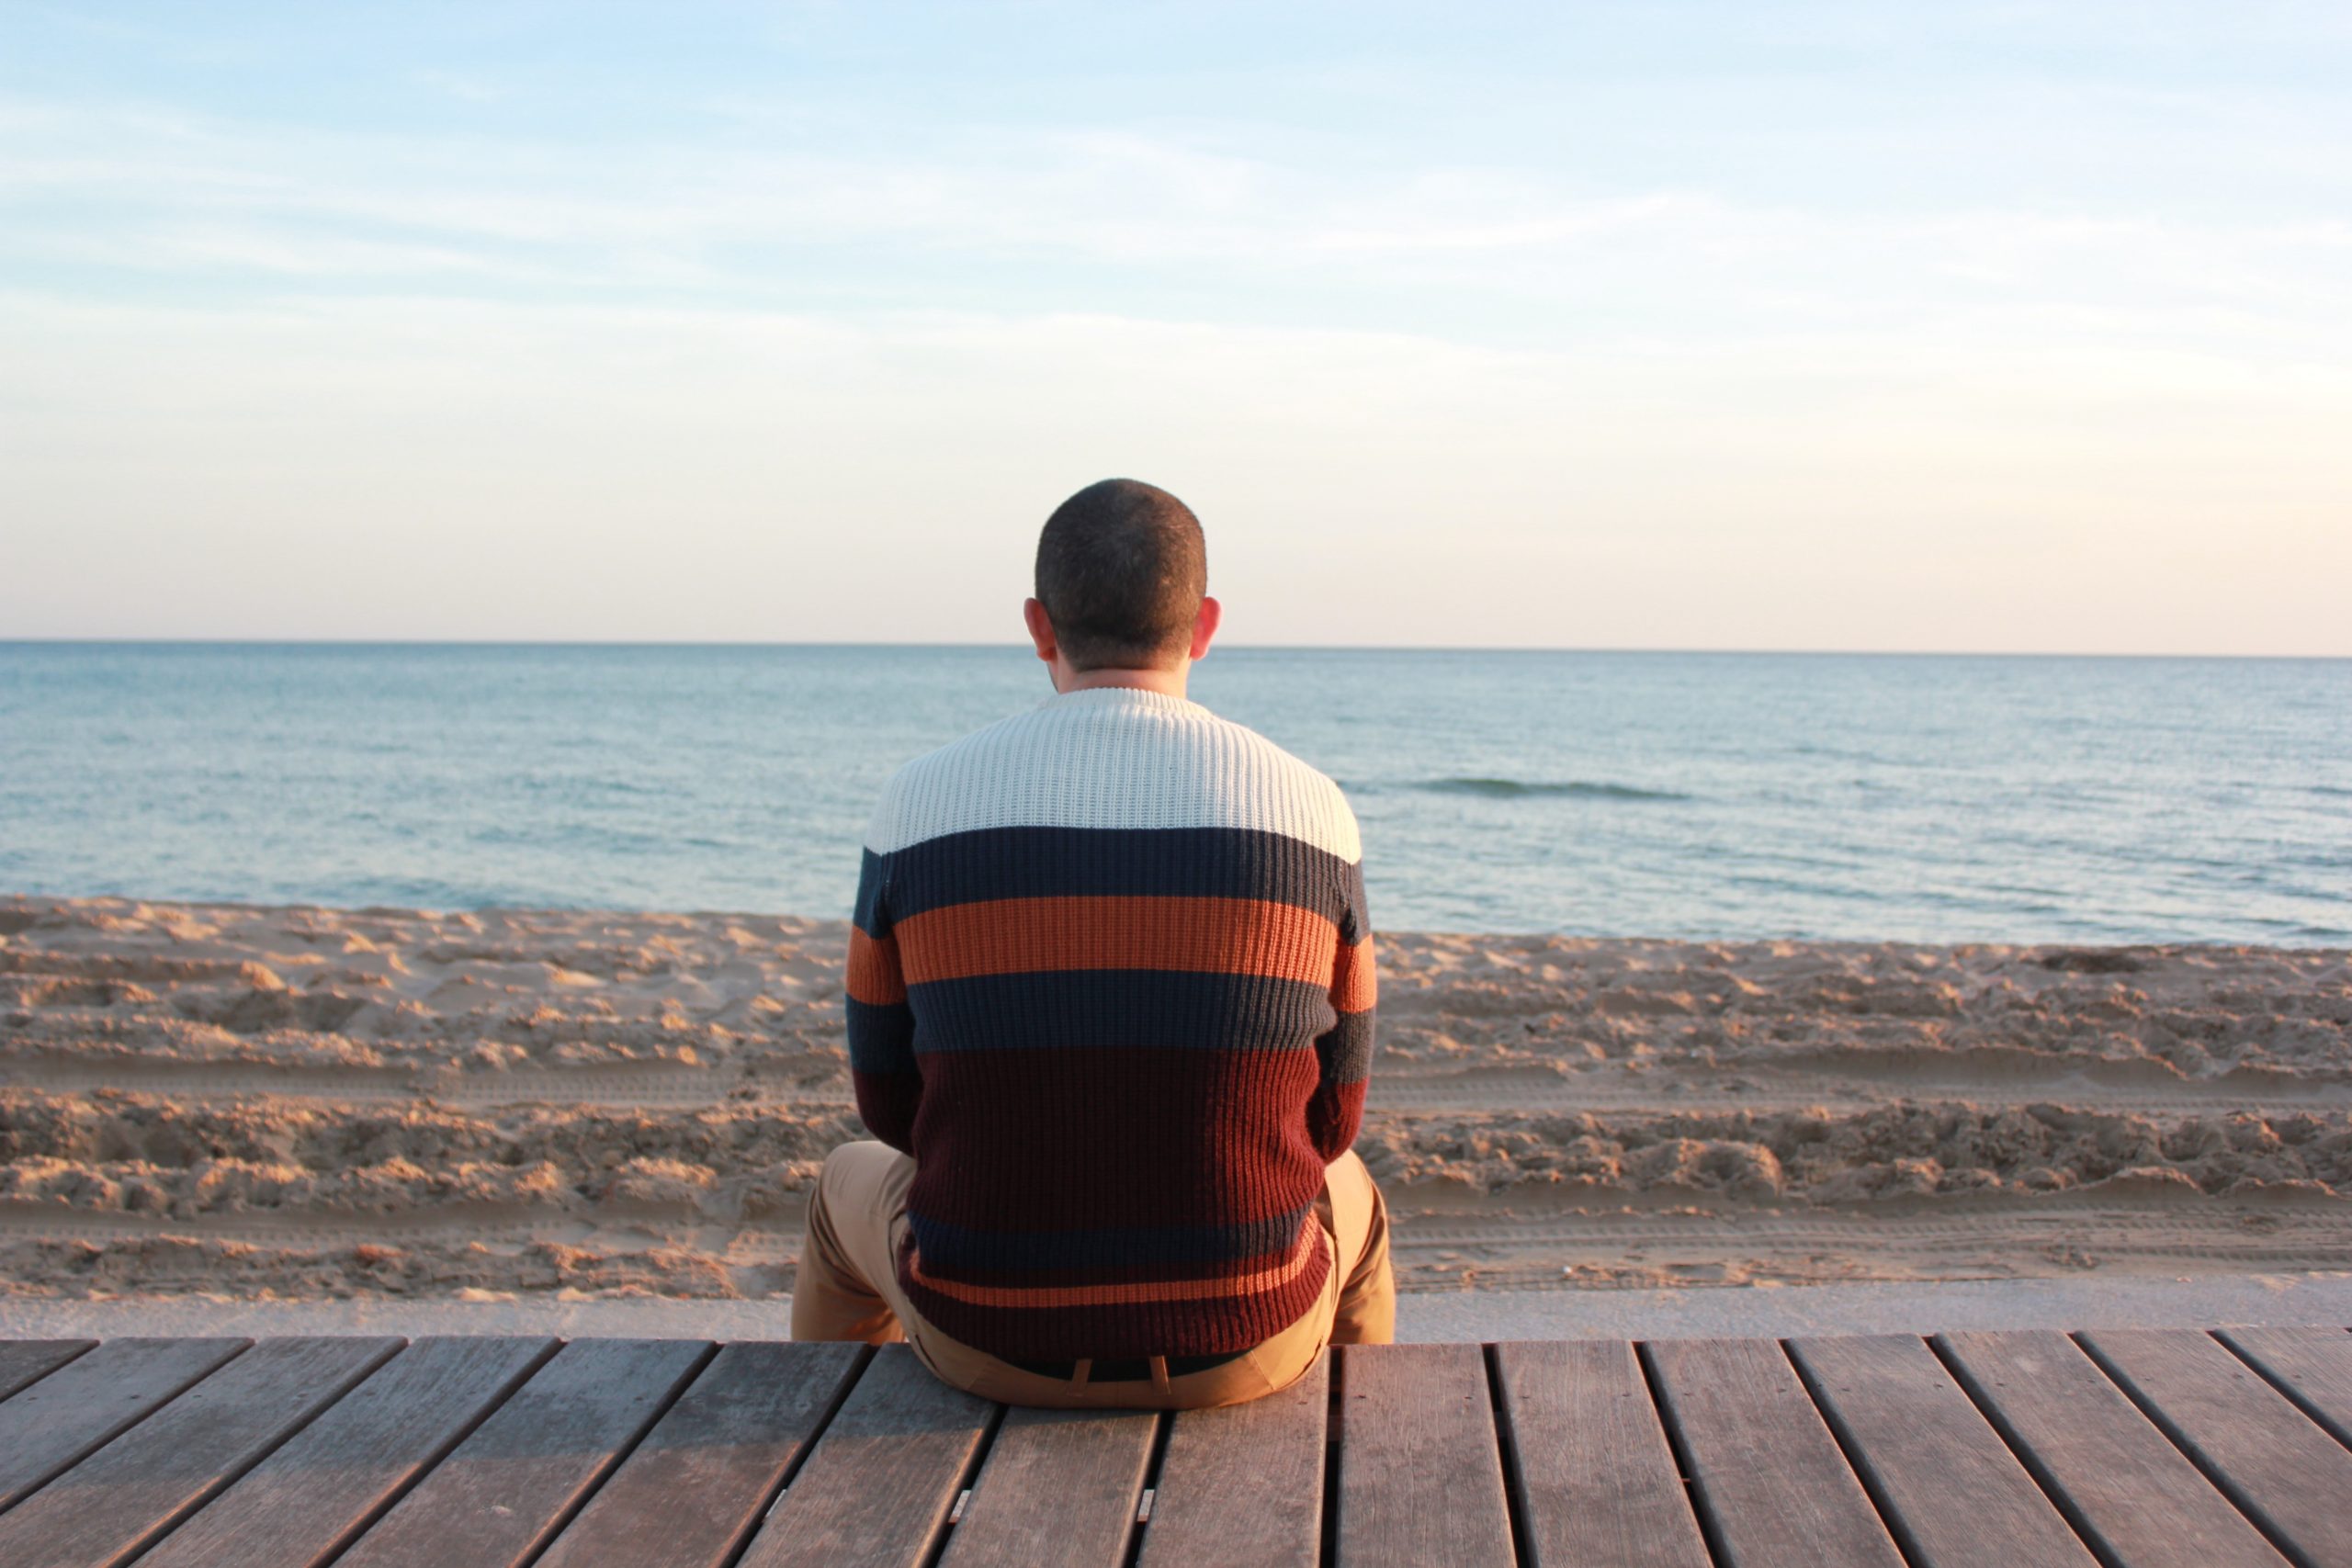 A man wearing a sweater sits on a wooden dock looking out to sea